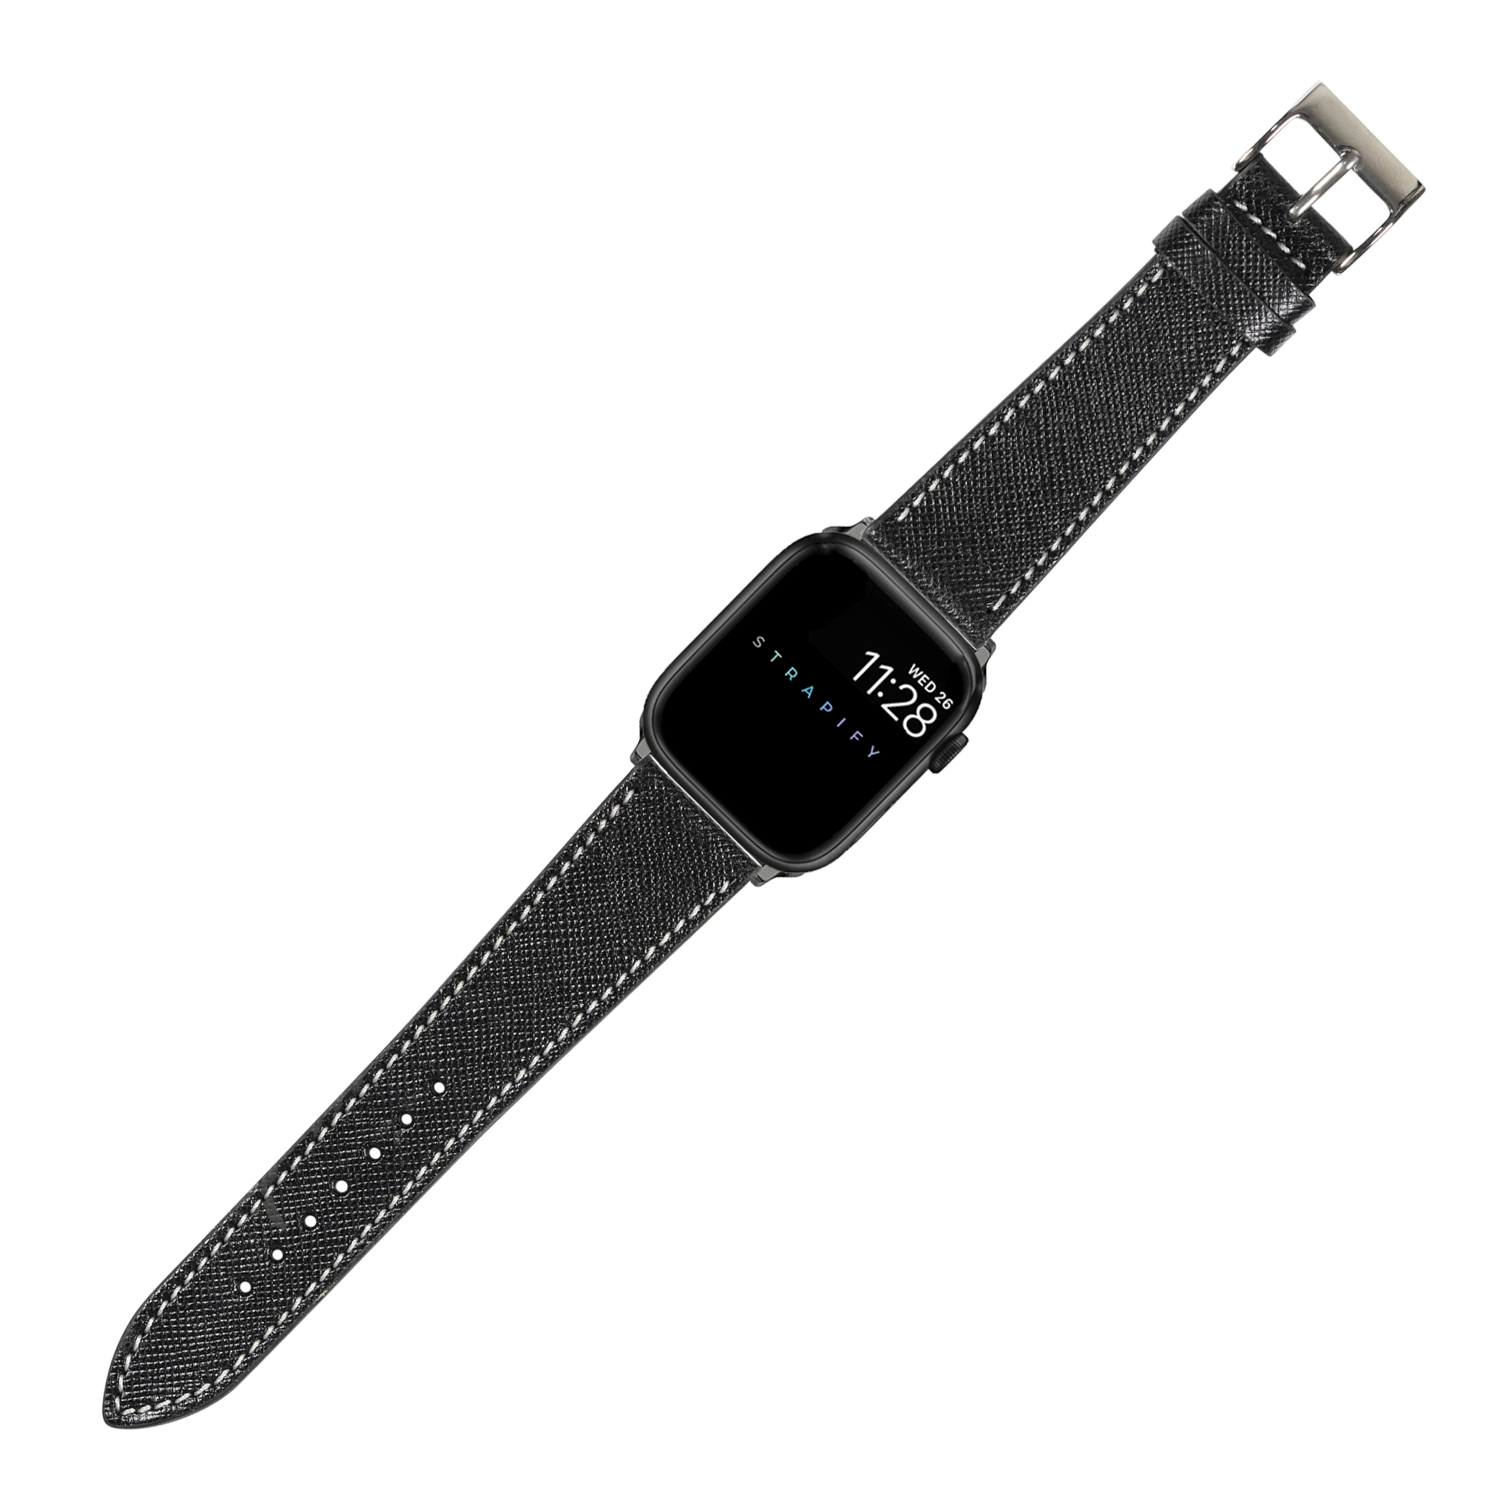 [Apple Watch] Saffiano Leather - Black with White Stitching